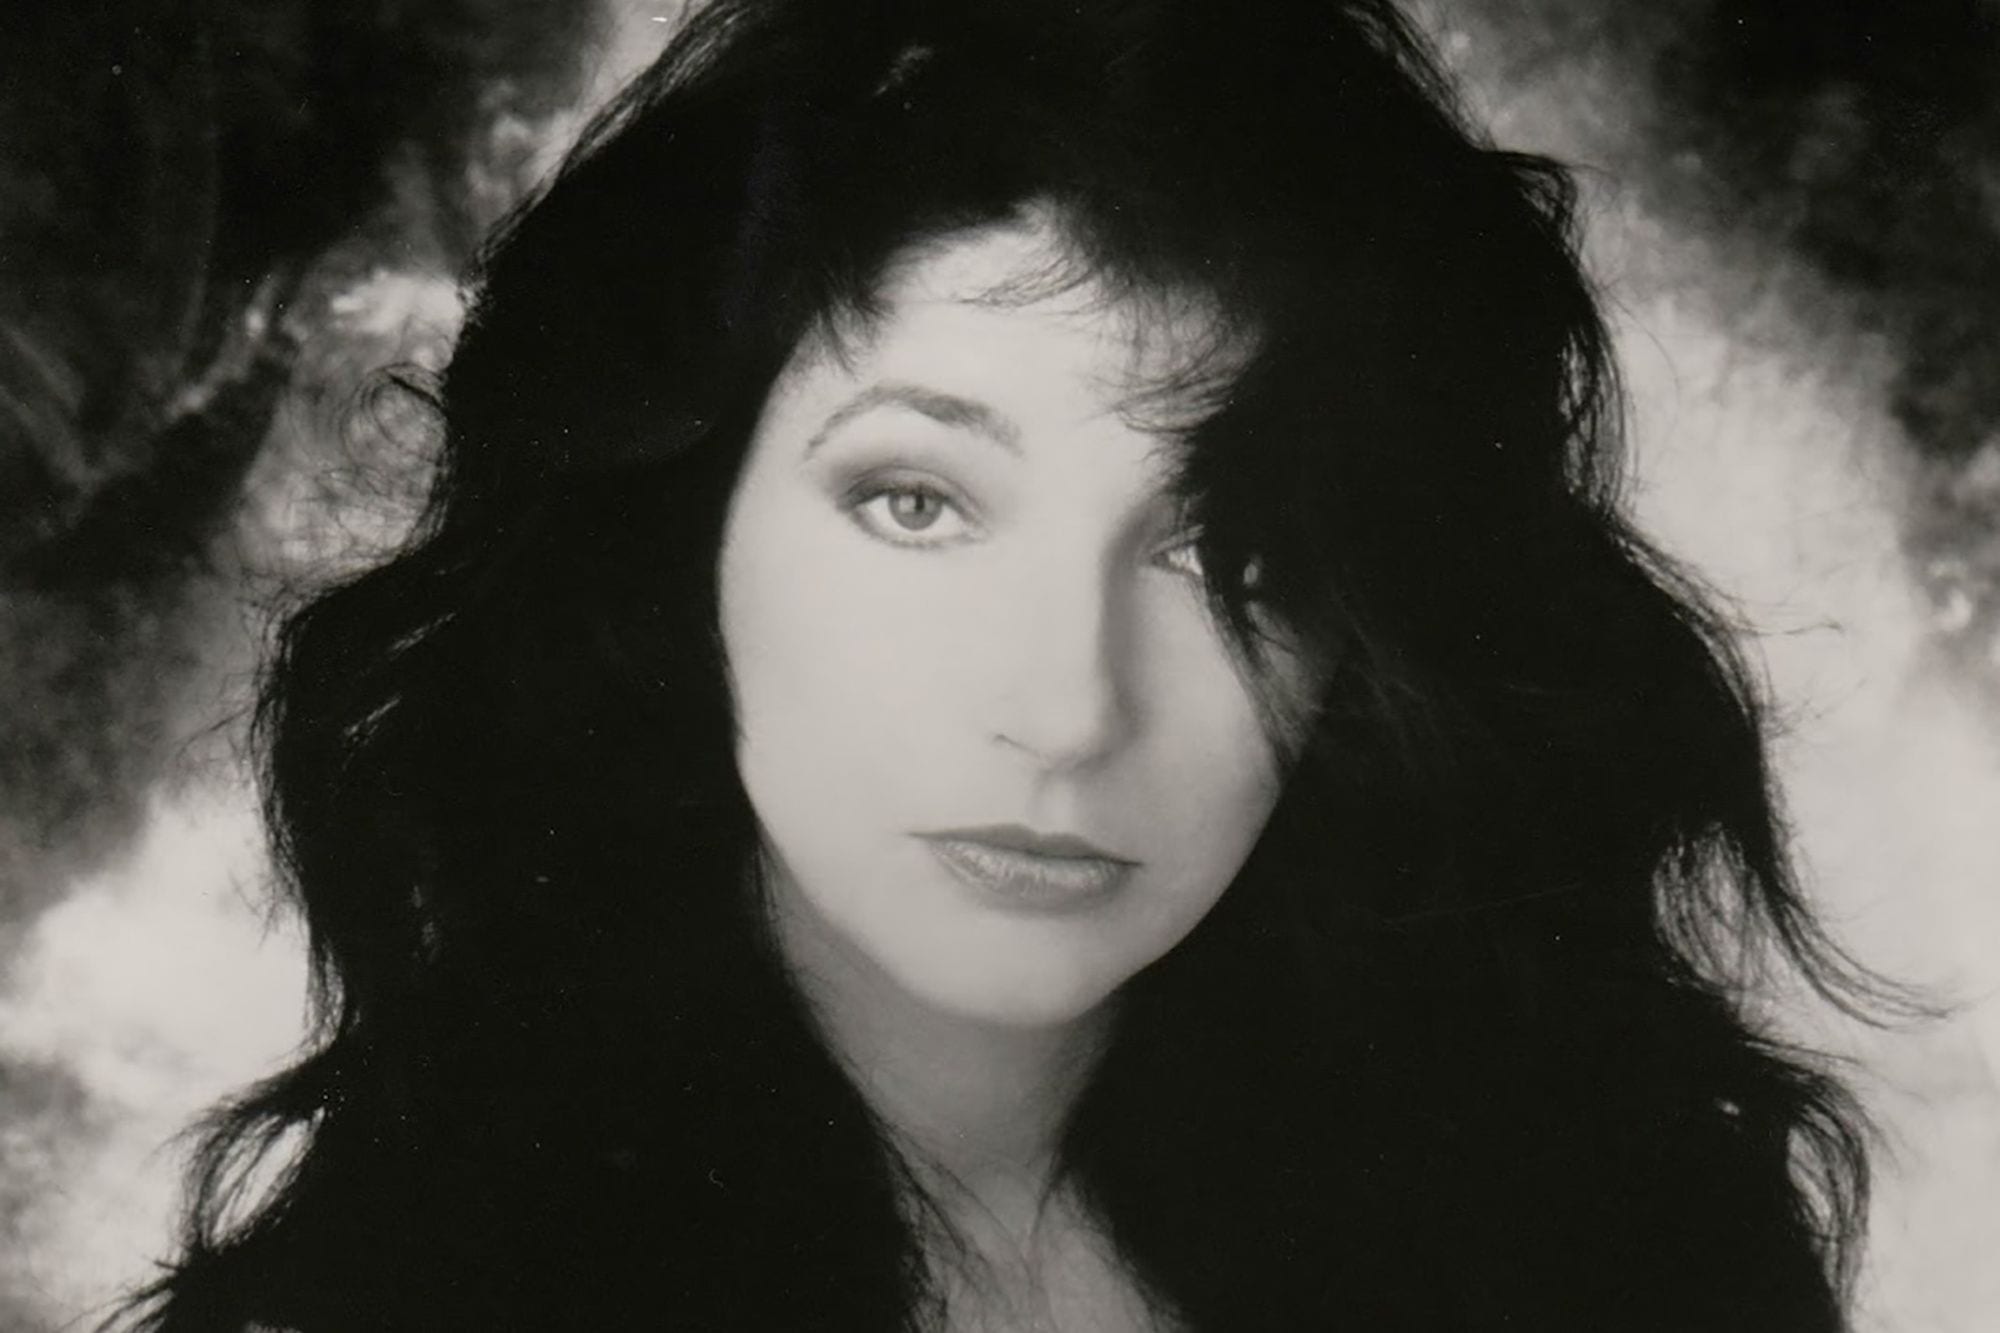 The song Kate Bush wrote about a tour tragedy